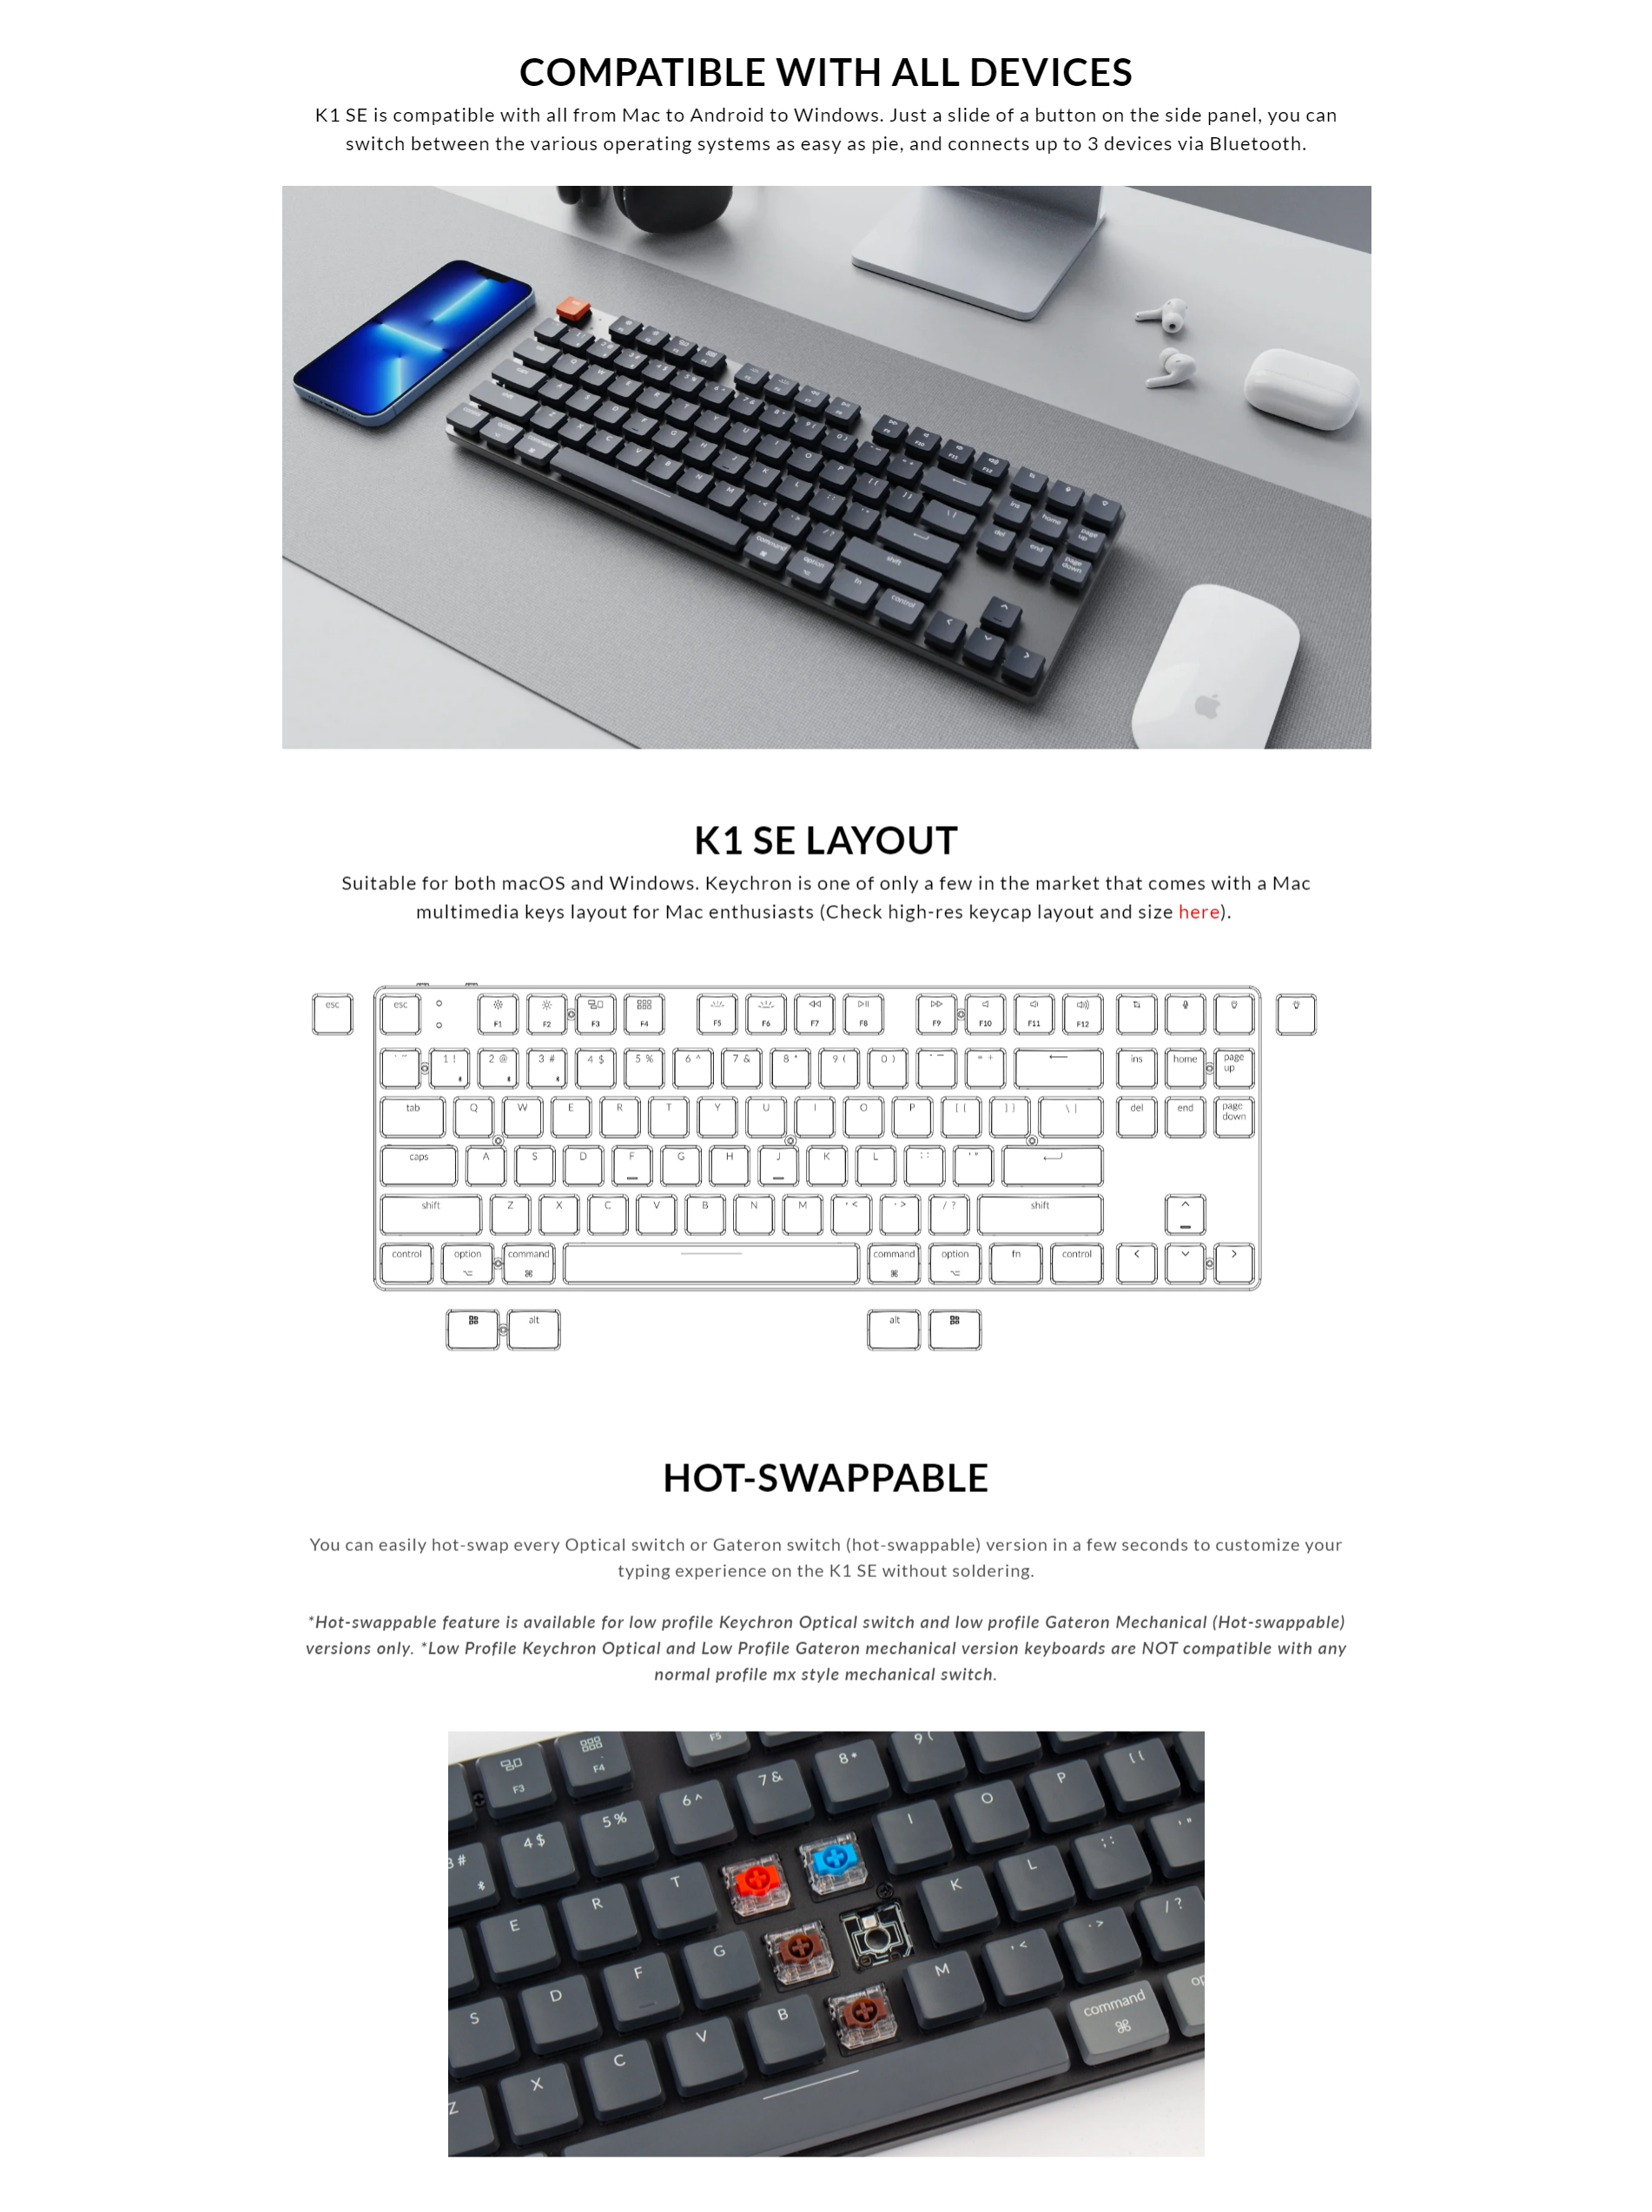 A large marketing image providing additional information about the product Keychron K1 SE Hot-Swappable RGB Optical TKL Wireless Mechanical Keyboard (Red Switch) - Additional alt info not provided